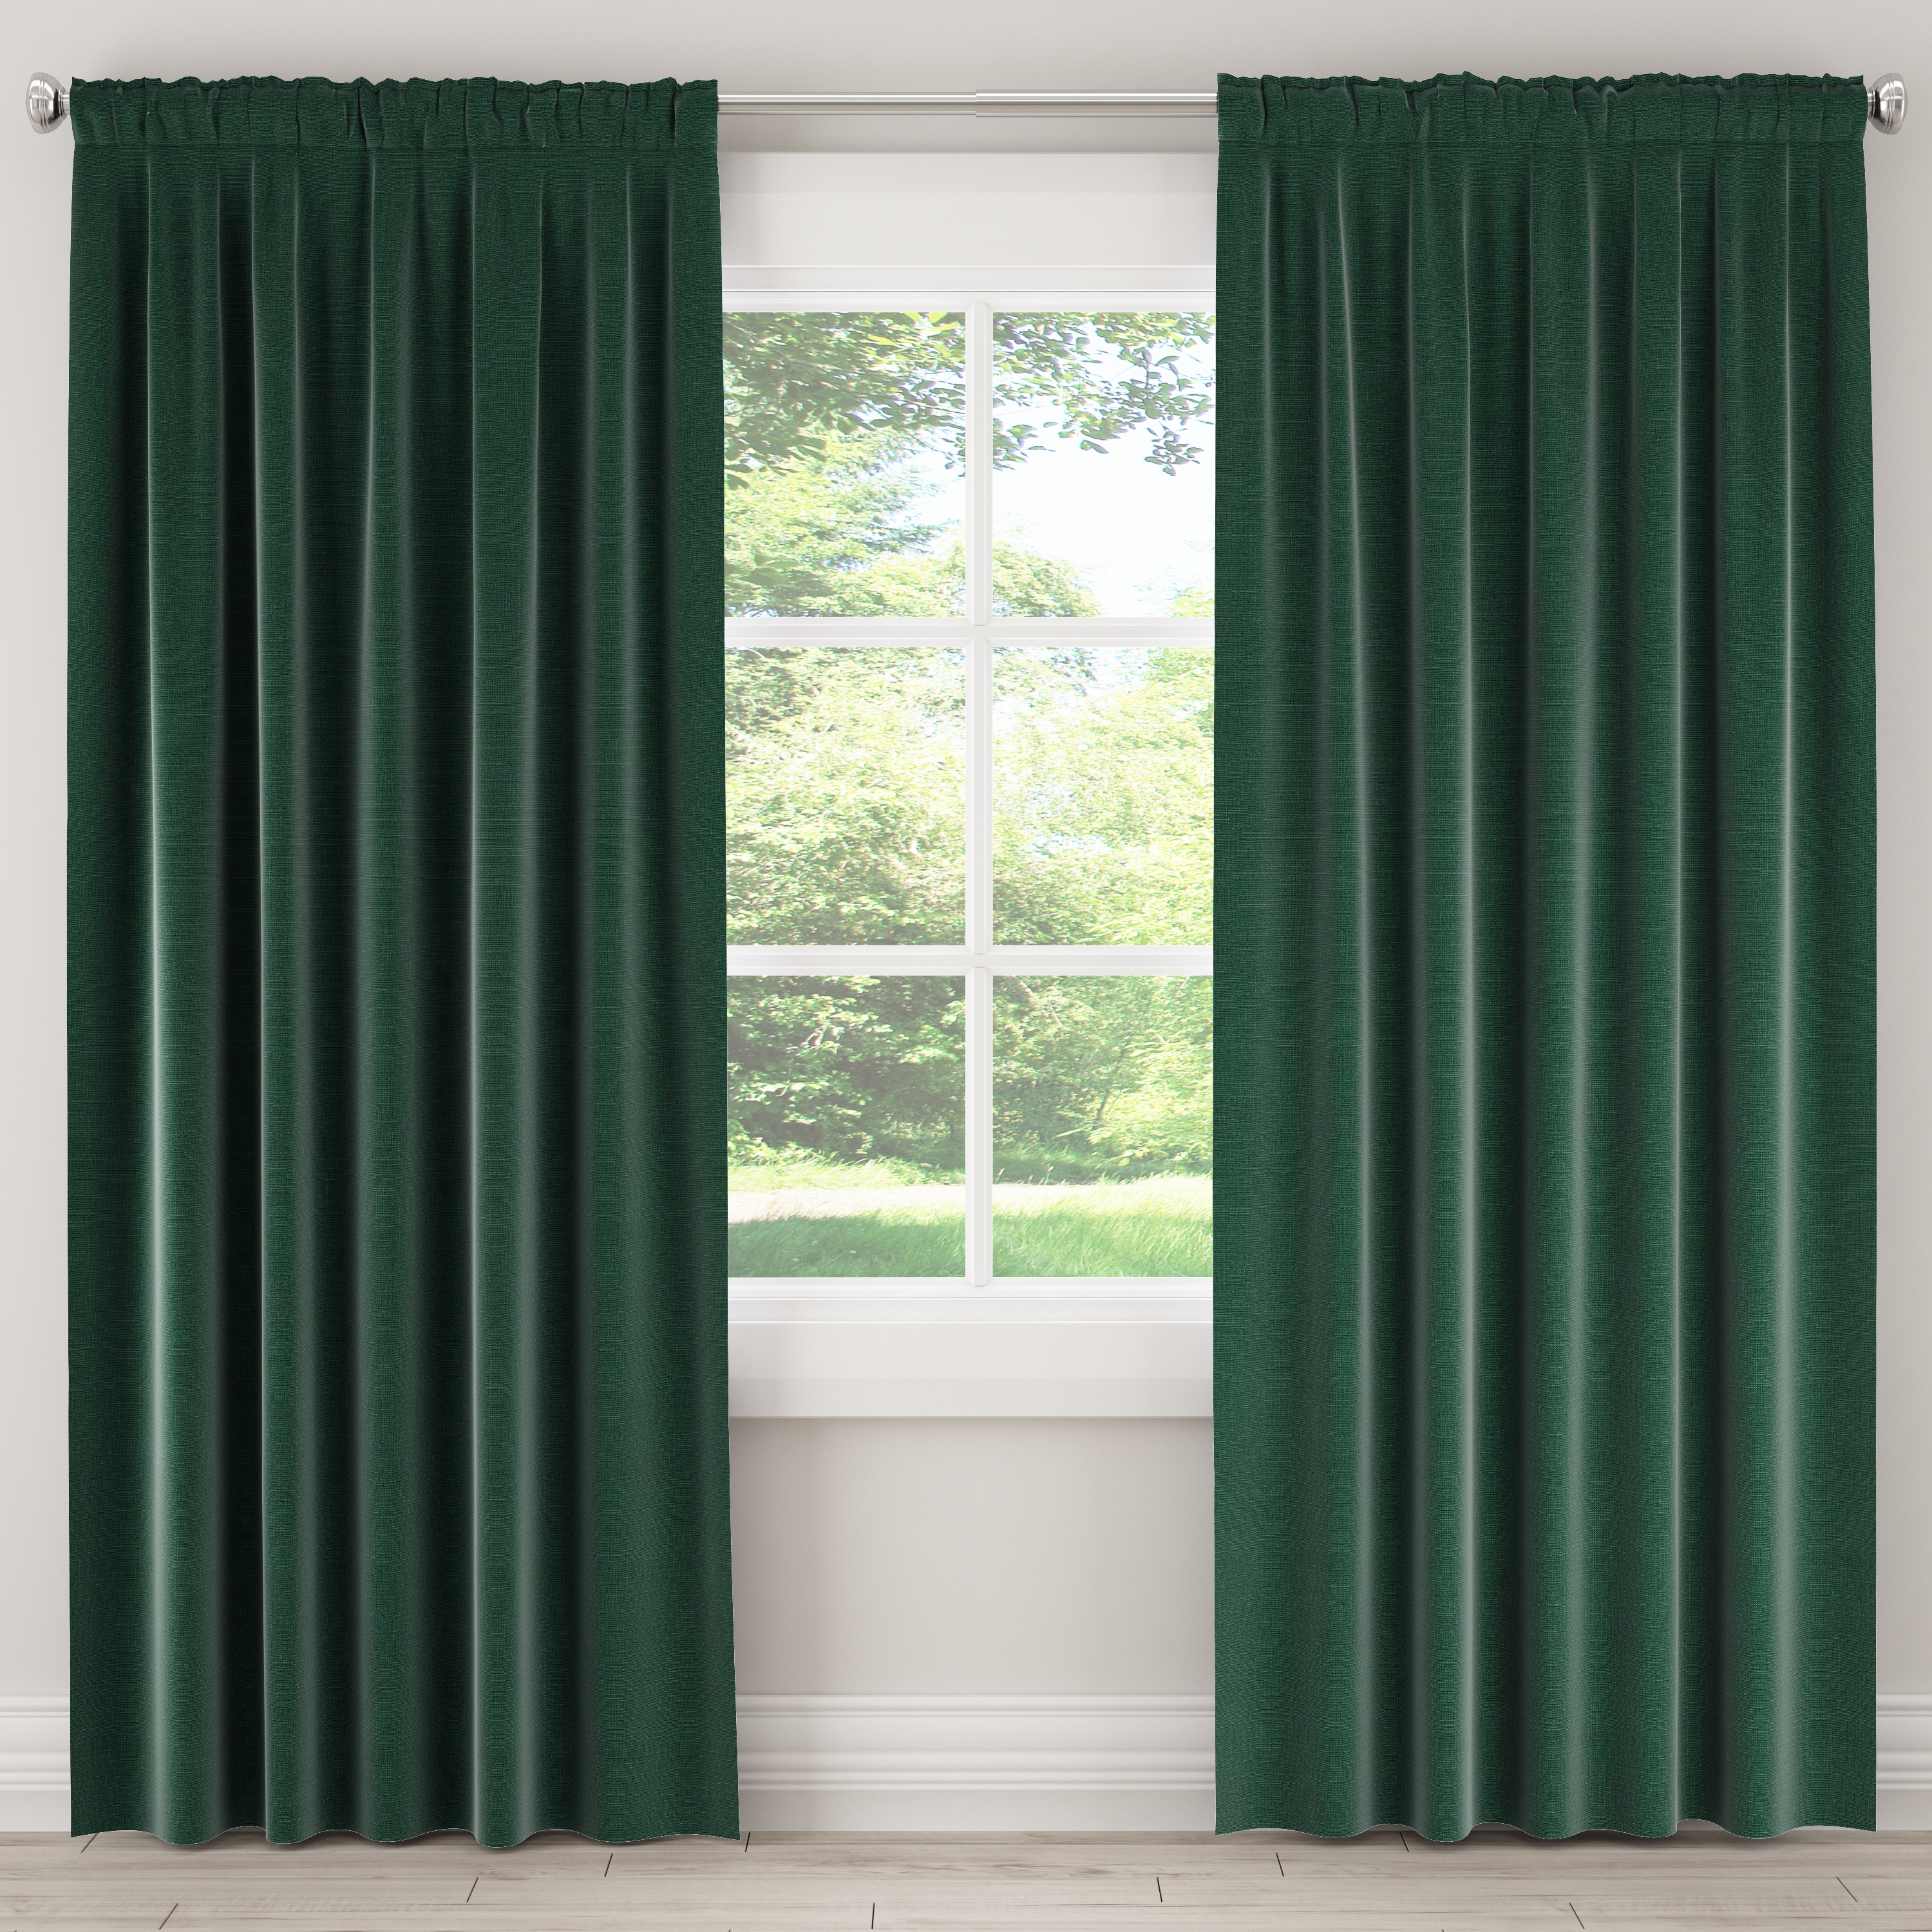 Conifer Green Curtain Panel - Image 2